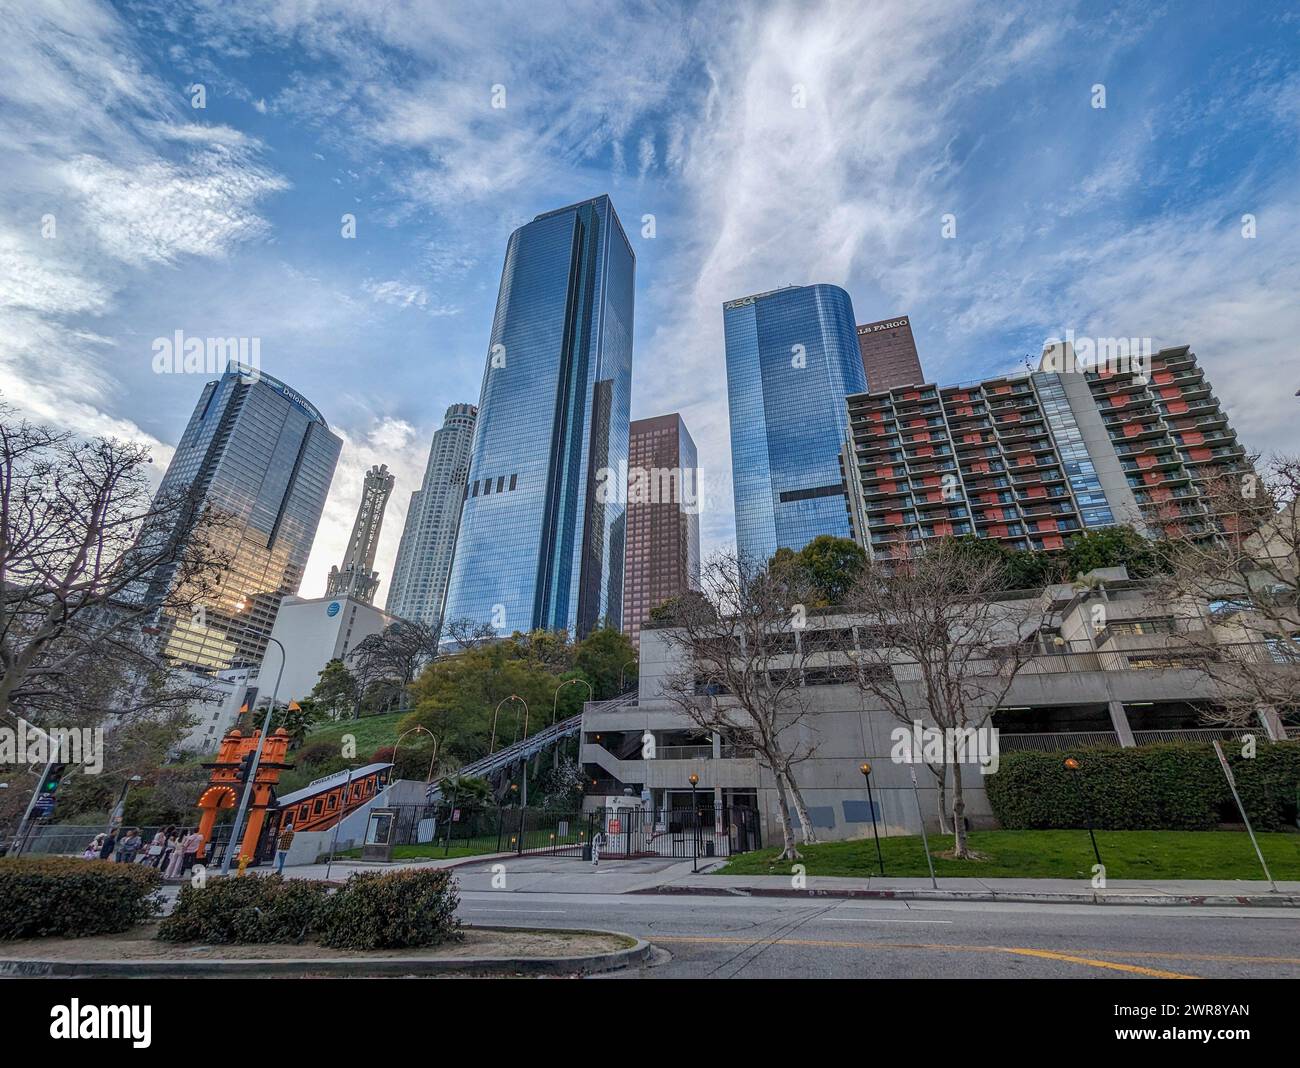 Bunker Hill in Downtown Los Angles, home of the famous Angels Flight railway and iconic skyscrapers. Stock Photo